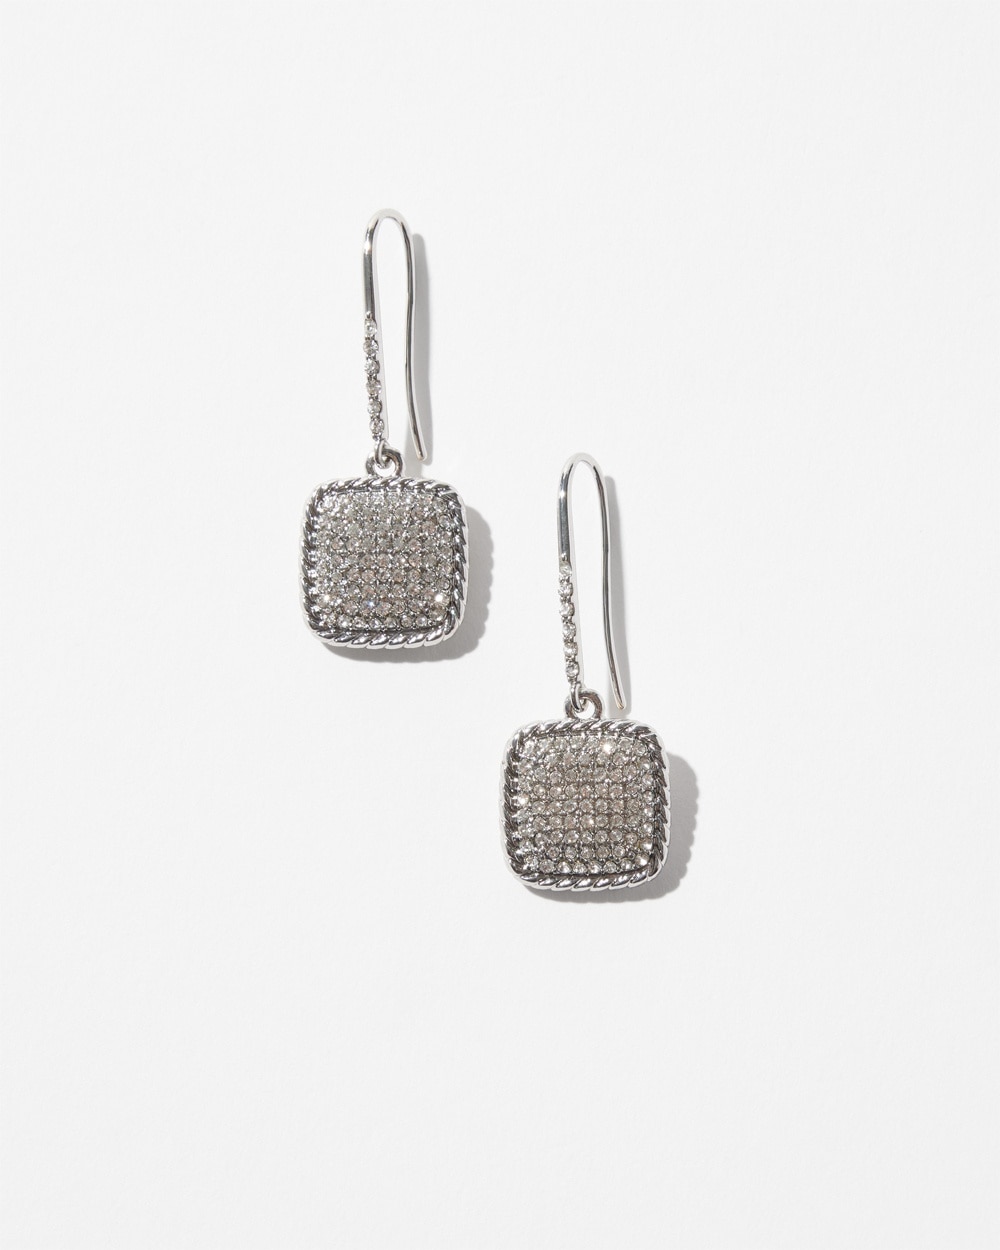 White House Black Market Silver Pave Square Earrings |